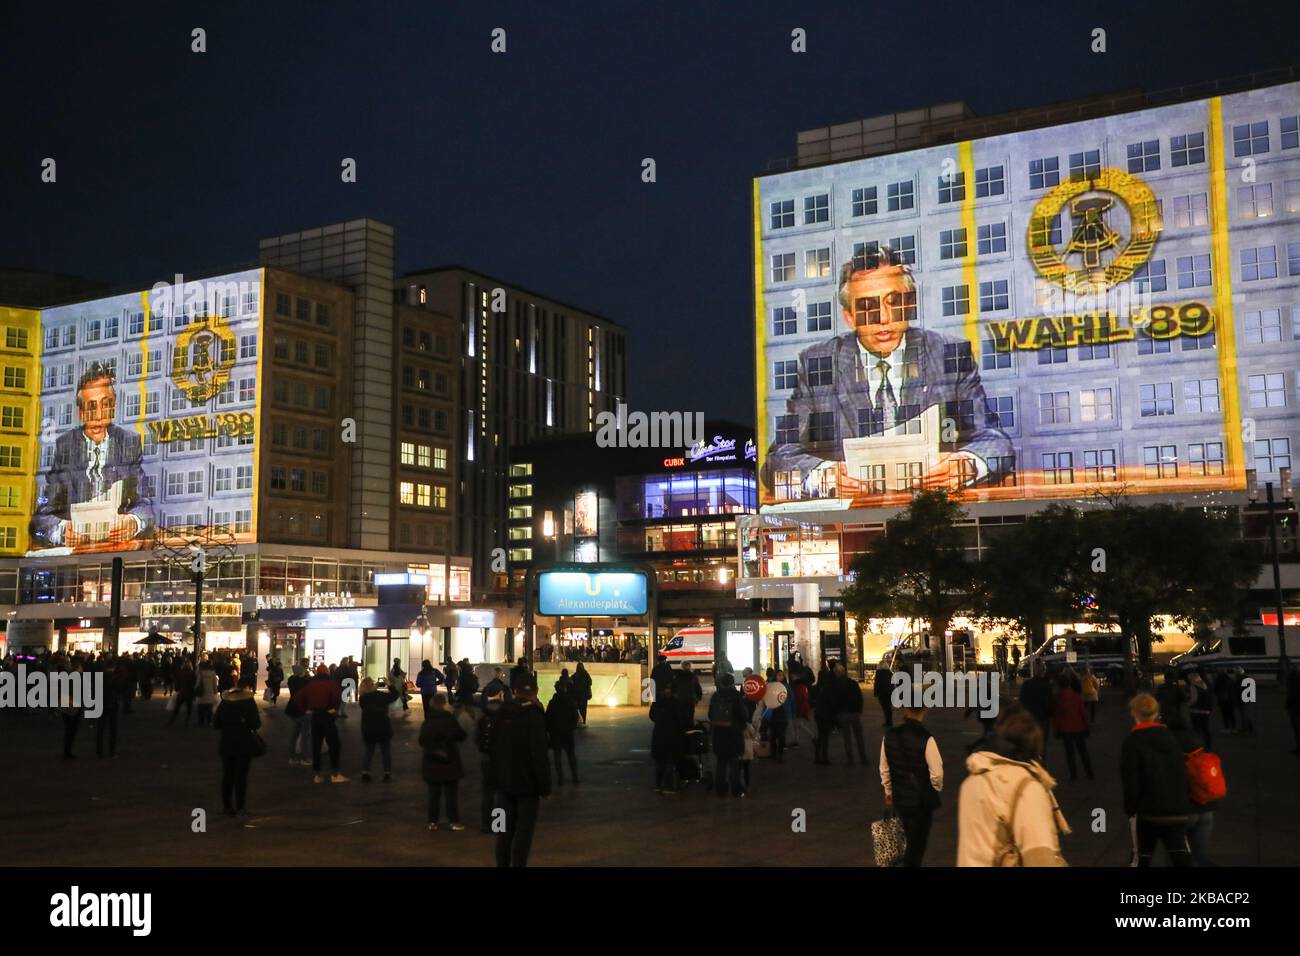 Historic pictures and quotes are projected on the buildings at Alexanderplatz for the upcoming 30th anniversary of the fall of the Berlin Wall. Berlin, Germany on 8 November, 2019. (Photo by Beata Zawrzel/NurPhoto) Stock Photo